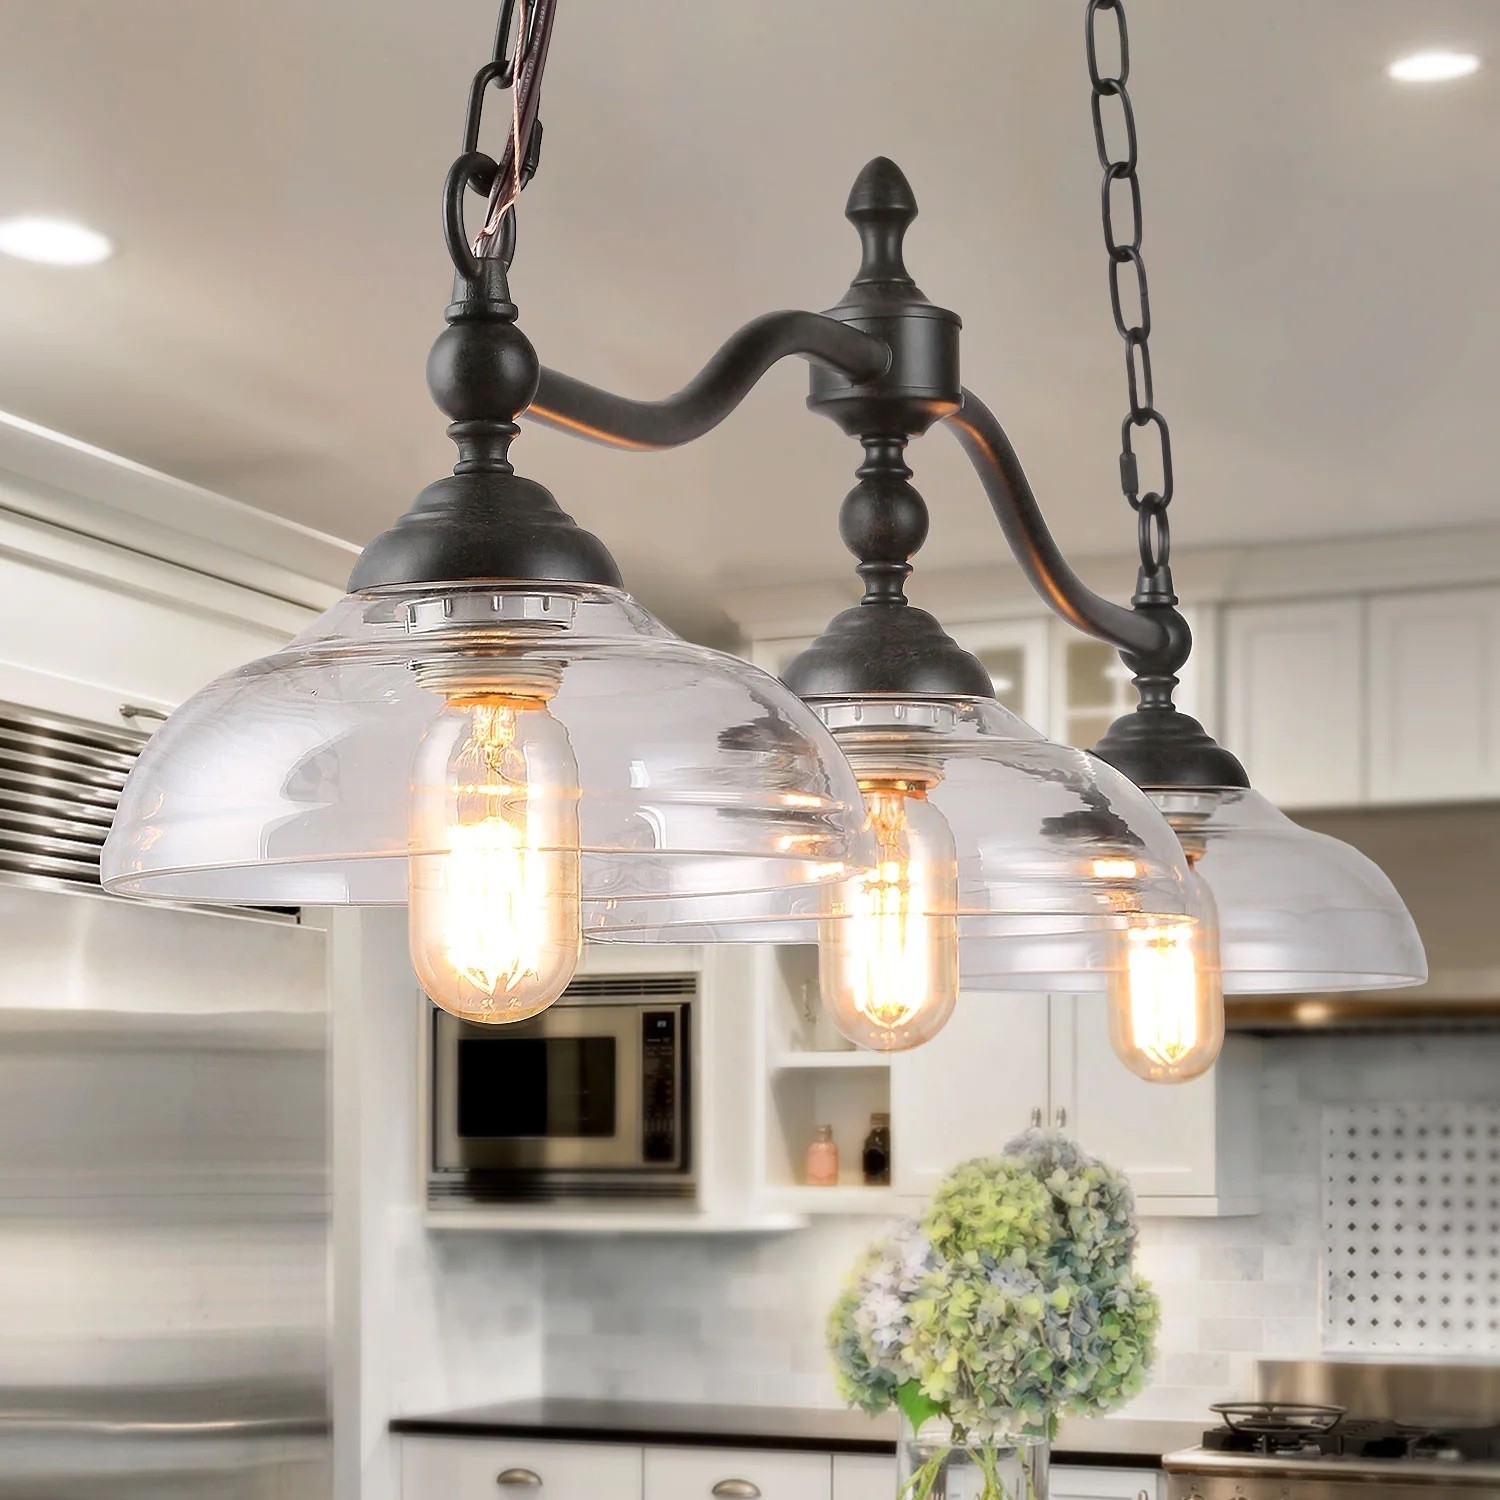 Farmhouse pull down light fixture with three lights